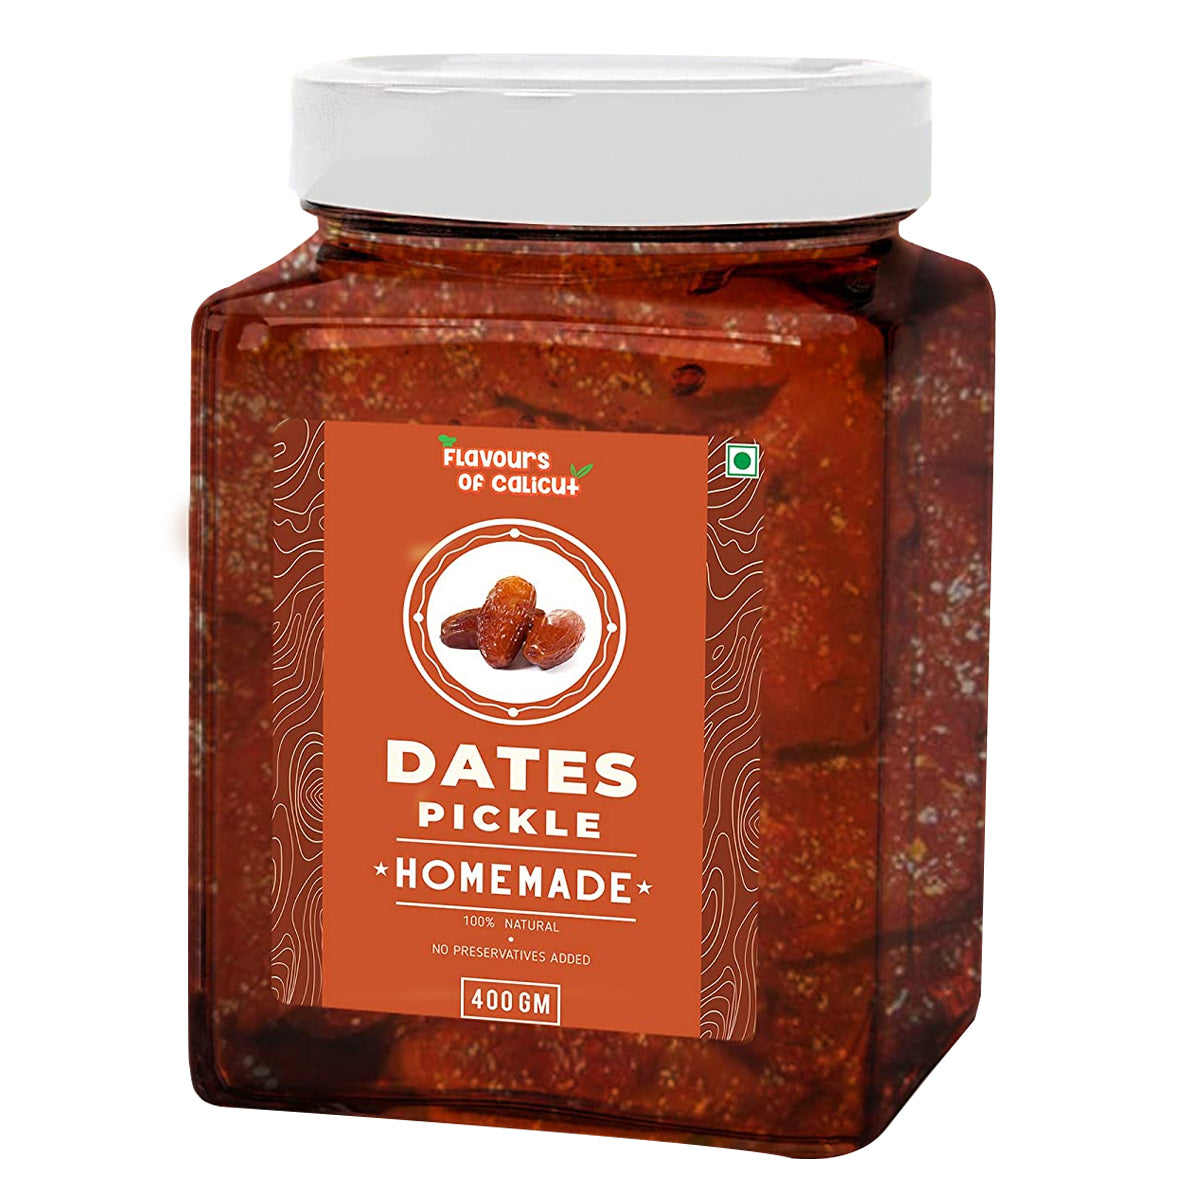 Homemade Dates Pickle